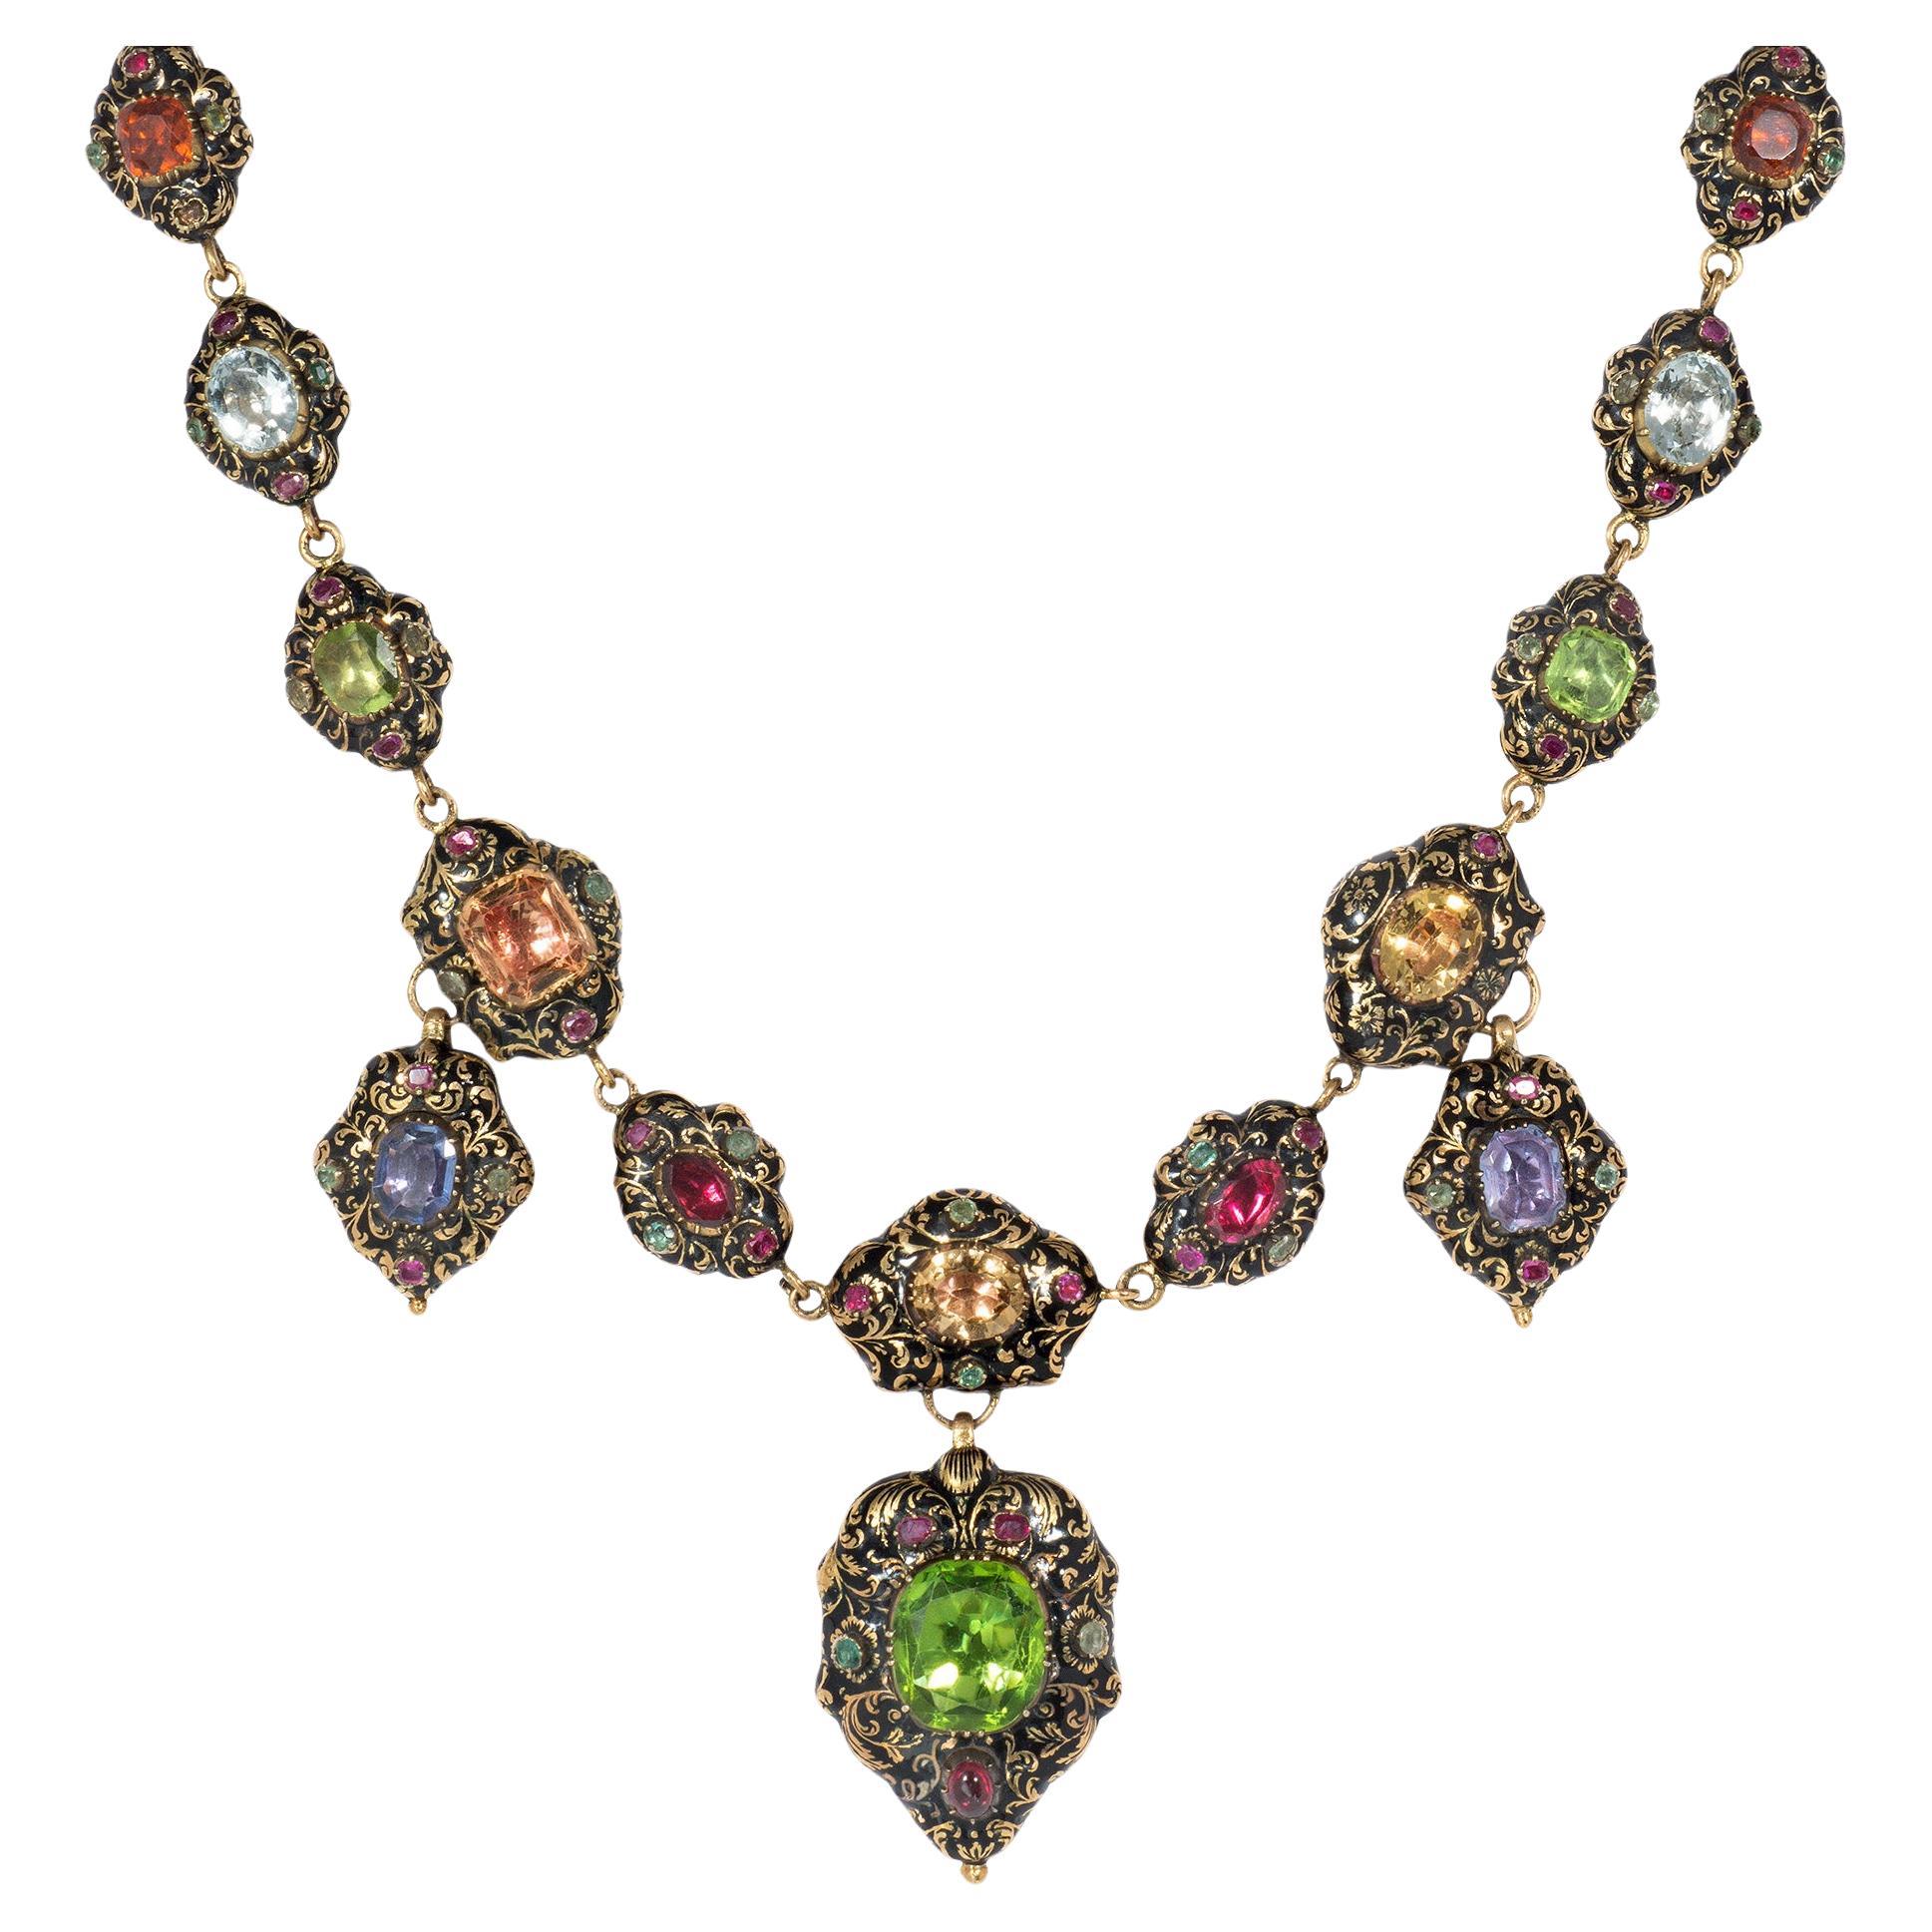 Important Antique Early-19th Century Swiss Enamel, Gold, and Multi-Gem Necklace